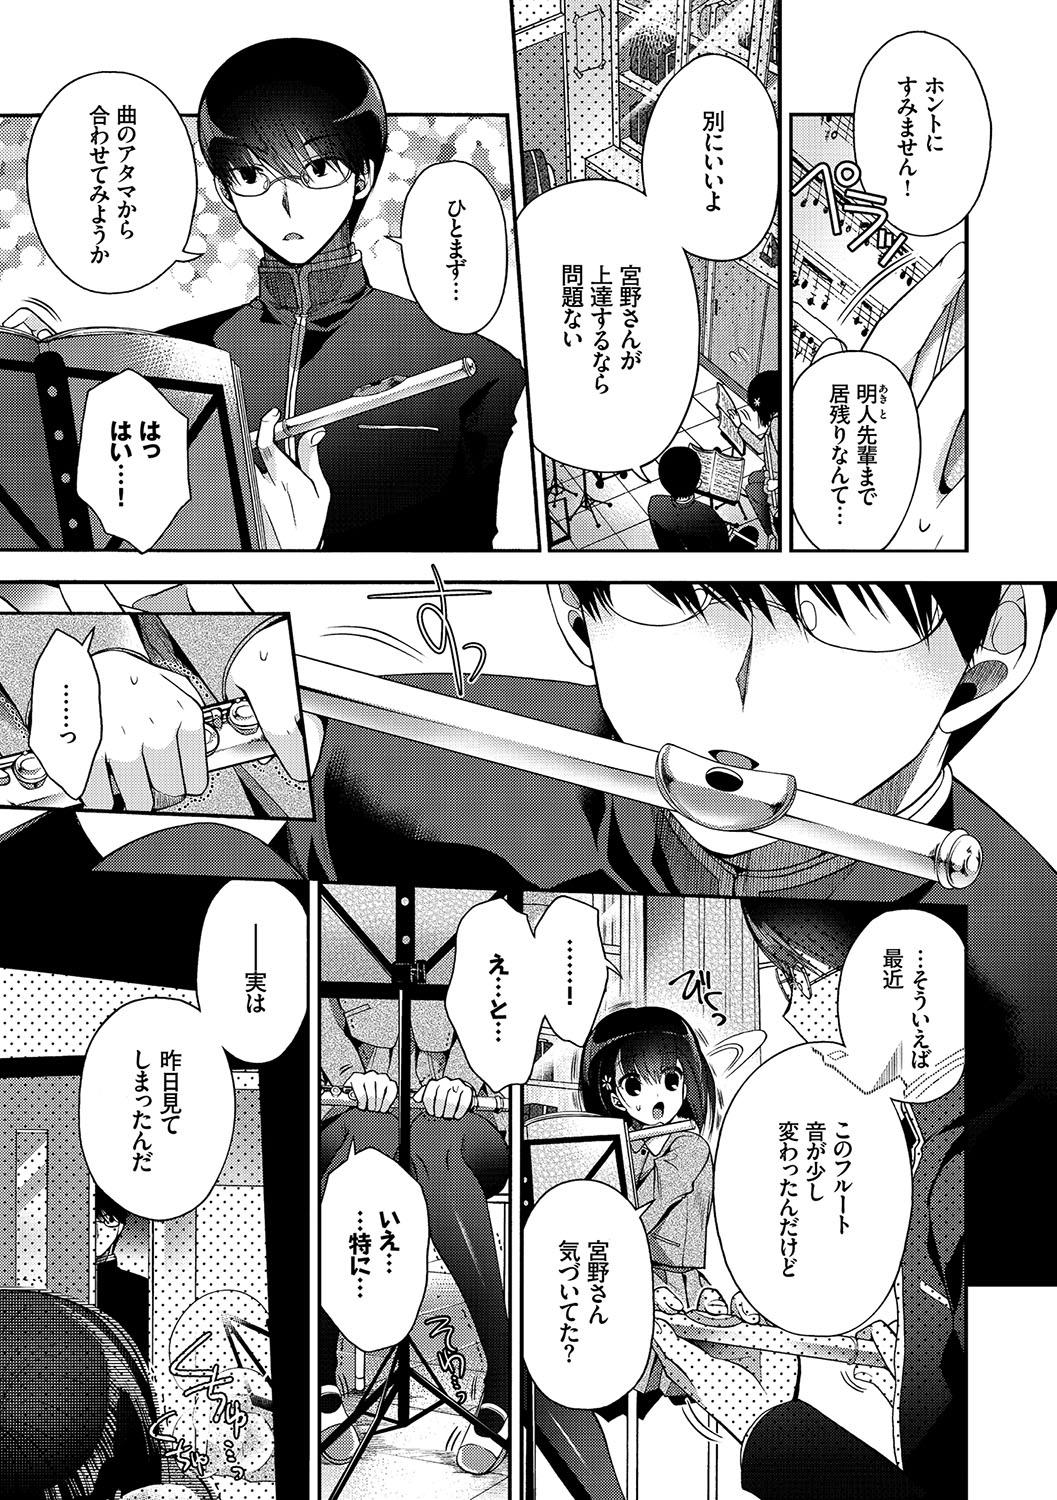 Reality Hatsukoi Melty - Melty First Love Gaystraight - Page 6